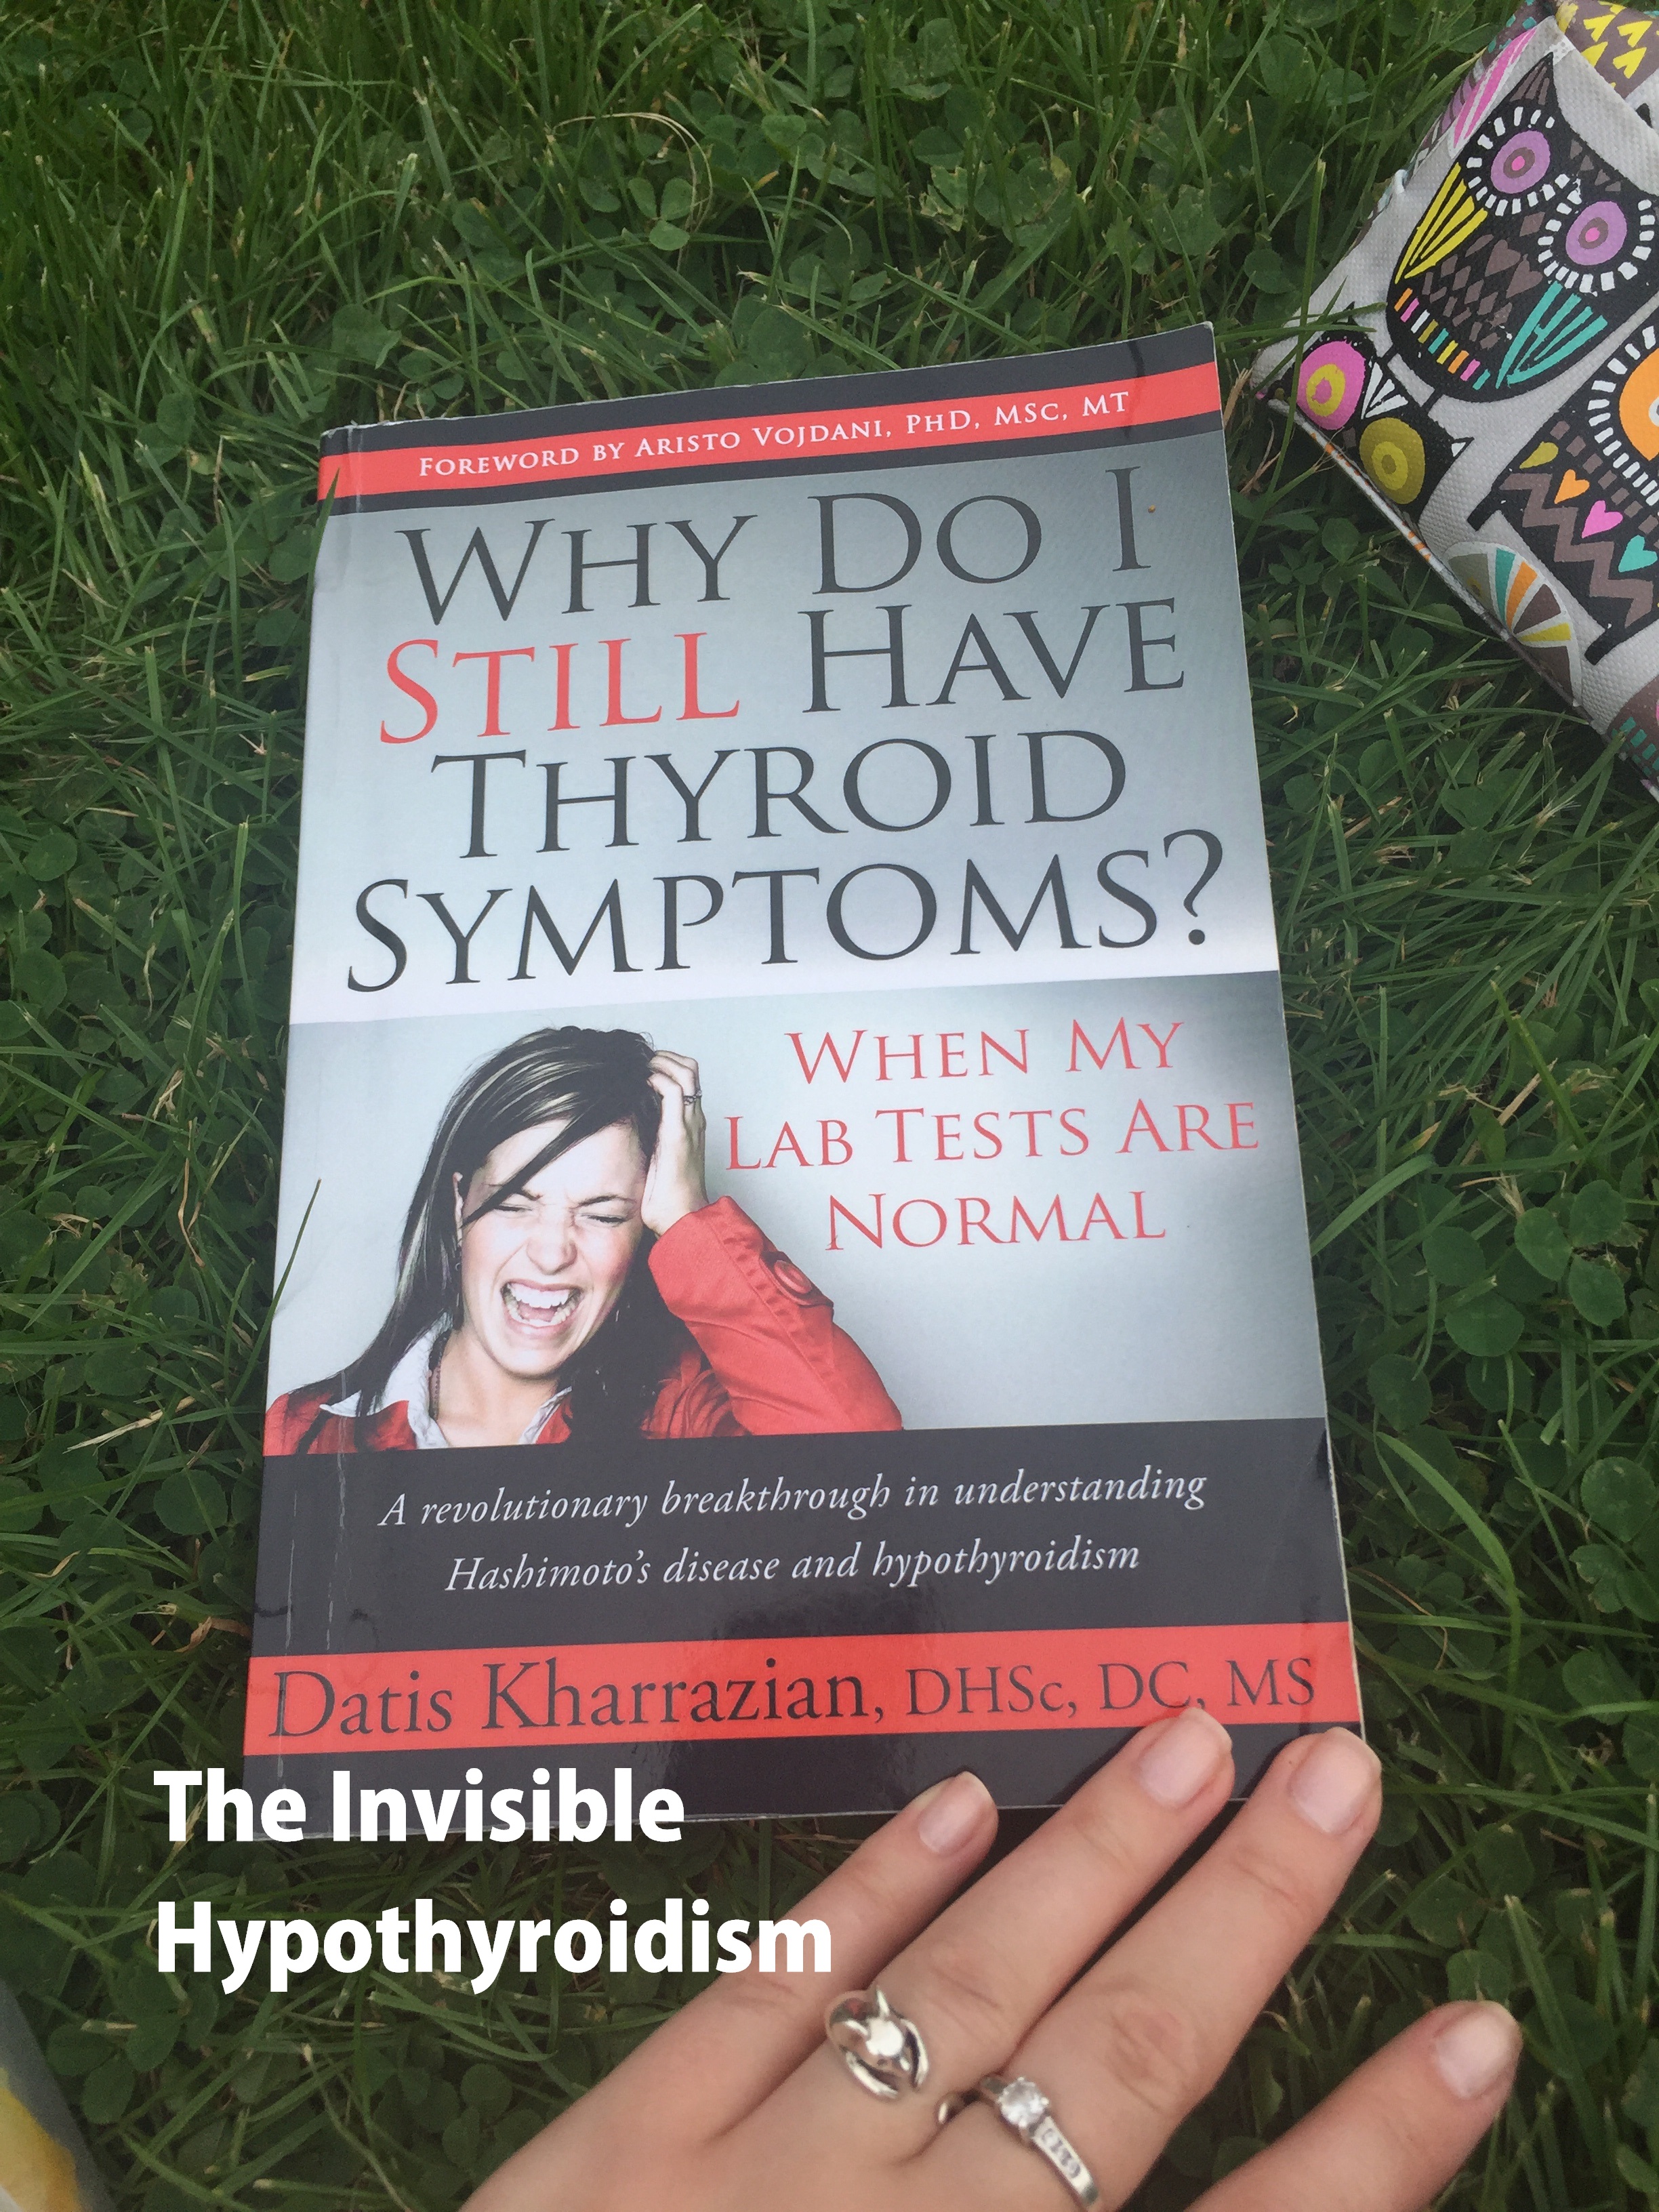 A picture of the book Why Do I Still Have Thyroid Symptoms? Byt Datis Kharrazian